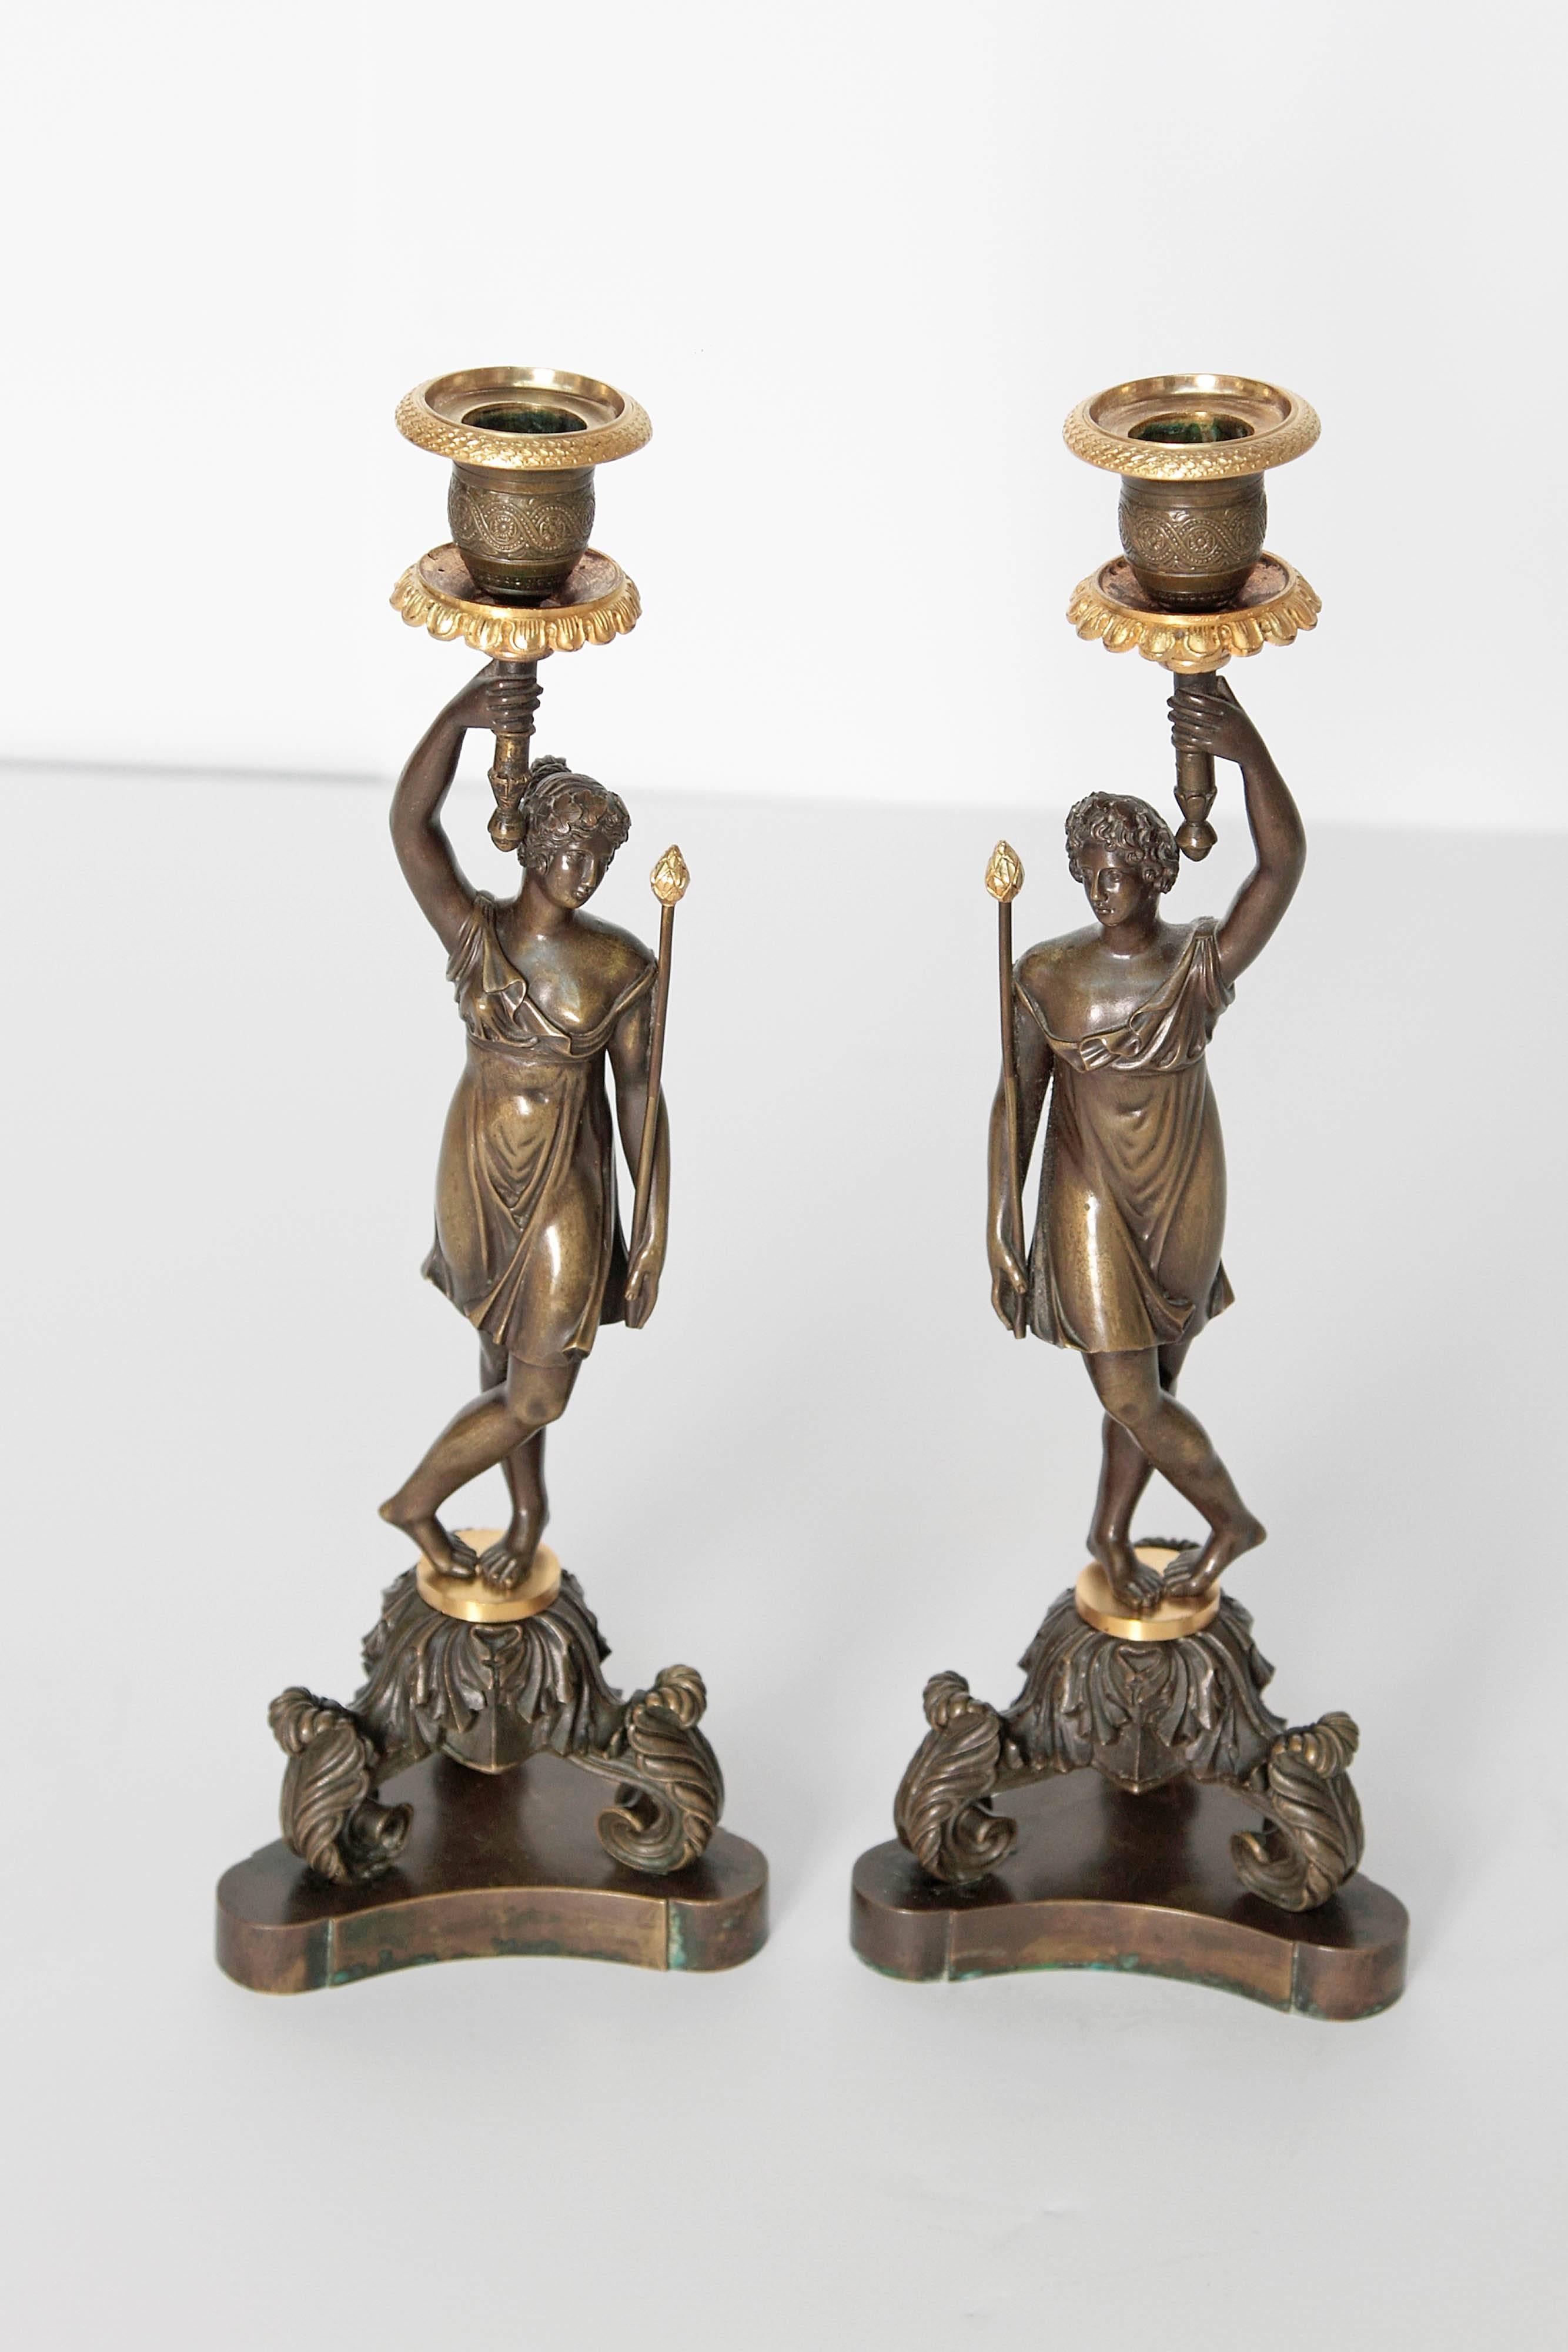 A pair of bronze and gilt bronze candlesticks of well-cast classical women holding a torch which holds the candle. They stand on a triangular plinth base and are supported with tripartite acanthus leaf volutes, 19th century, France.